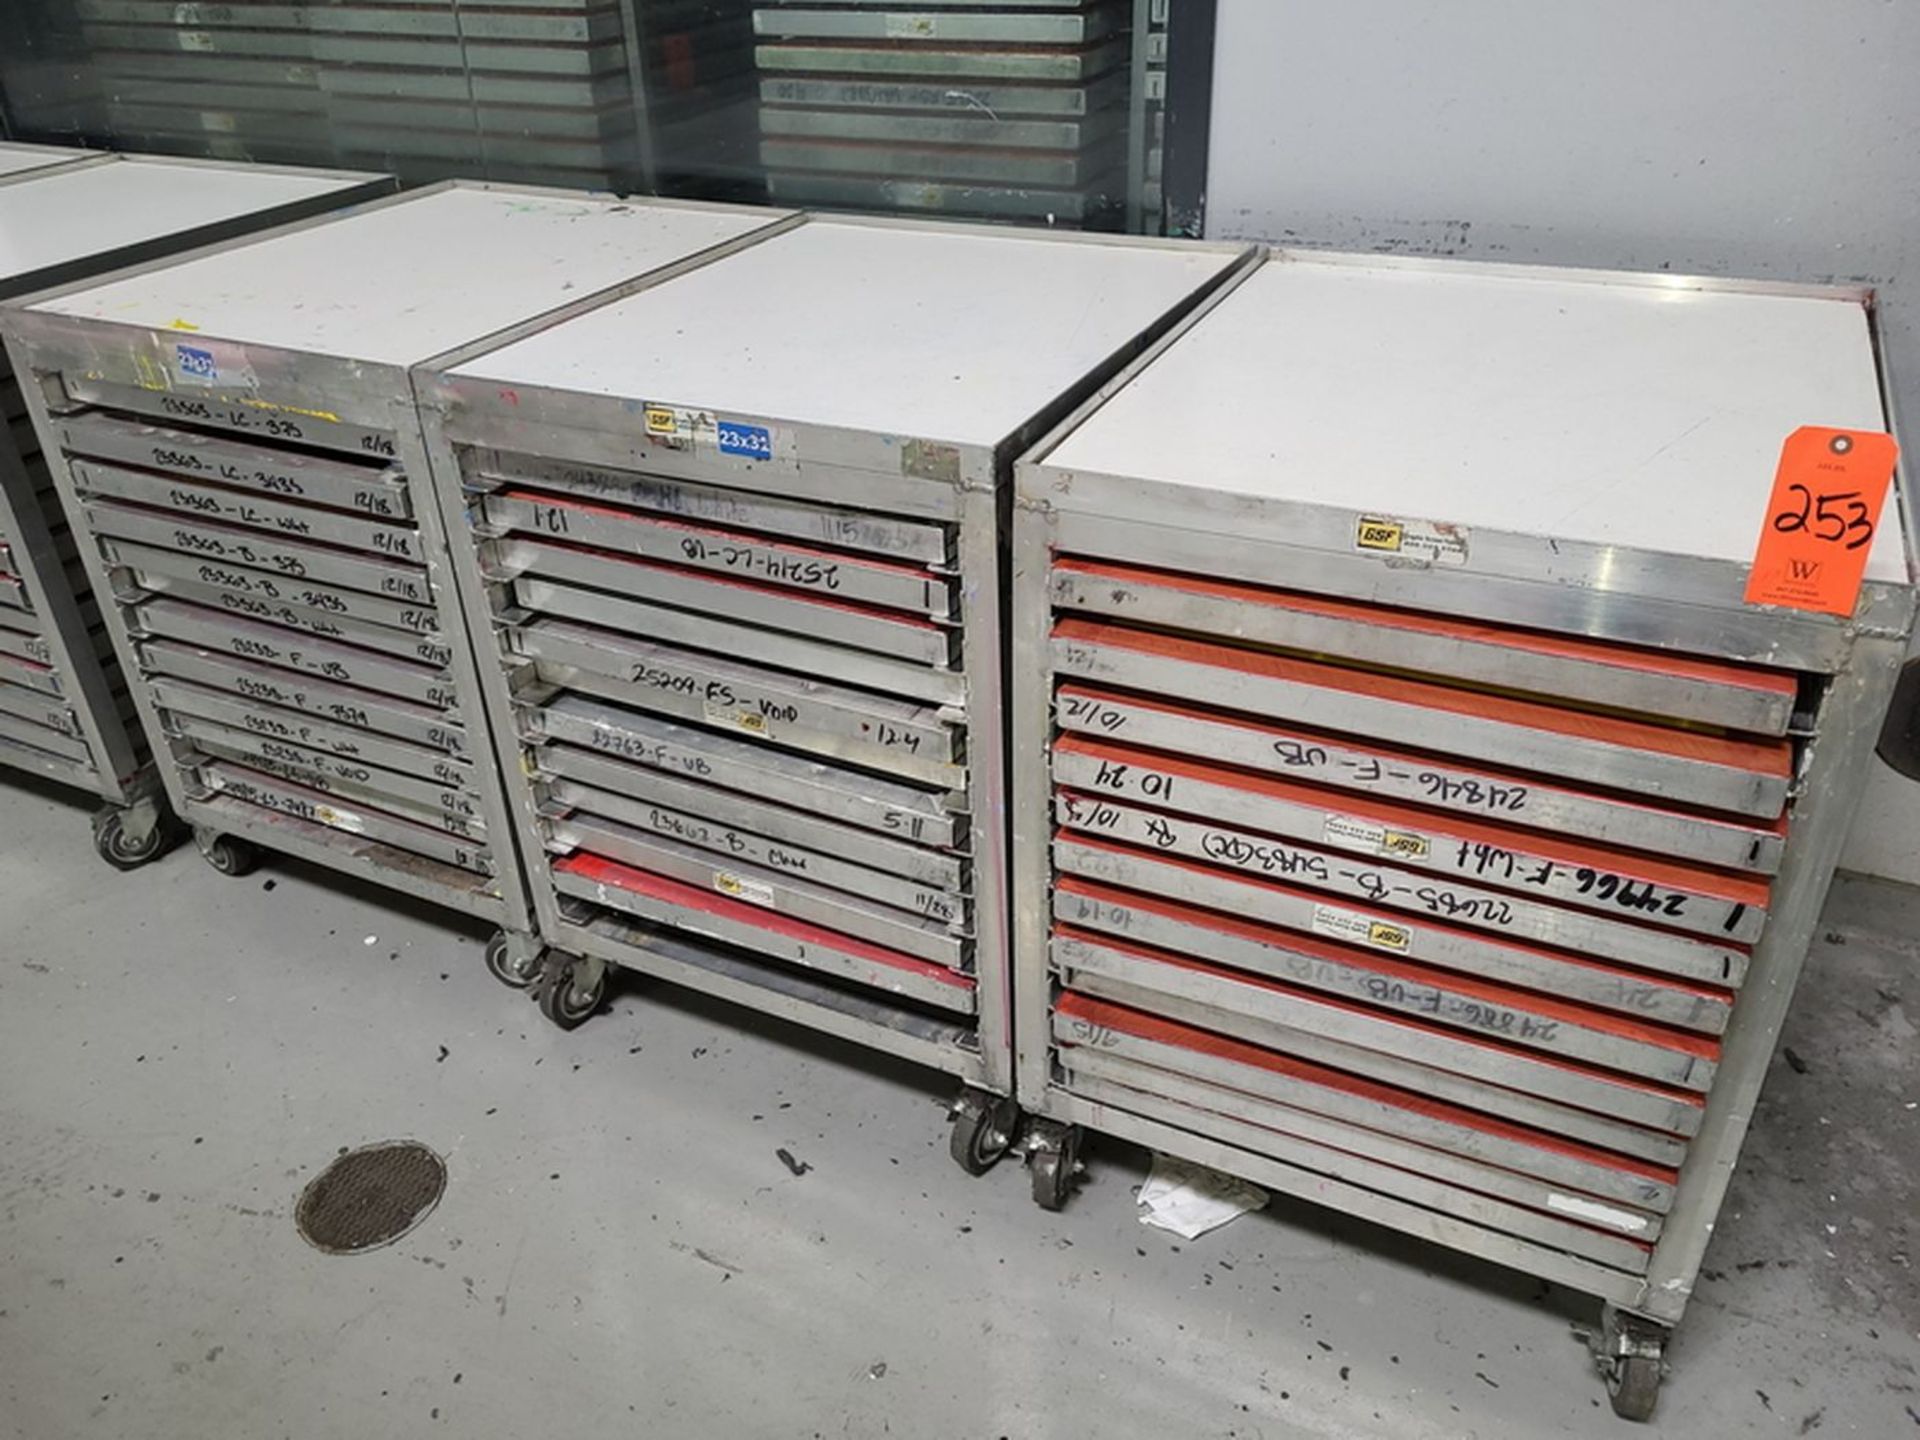 Lot - (3) GSF Portable Aluminum Screen Carts & Contents; Fits 23 in. x 31 in. Frames, Includes (